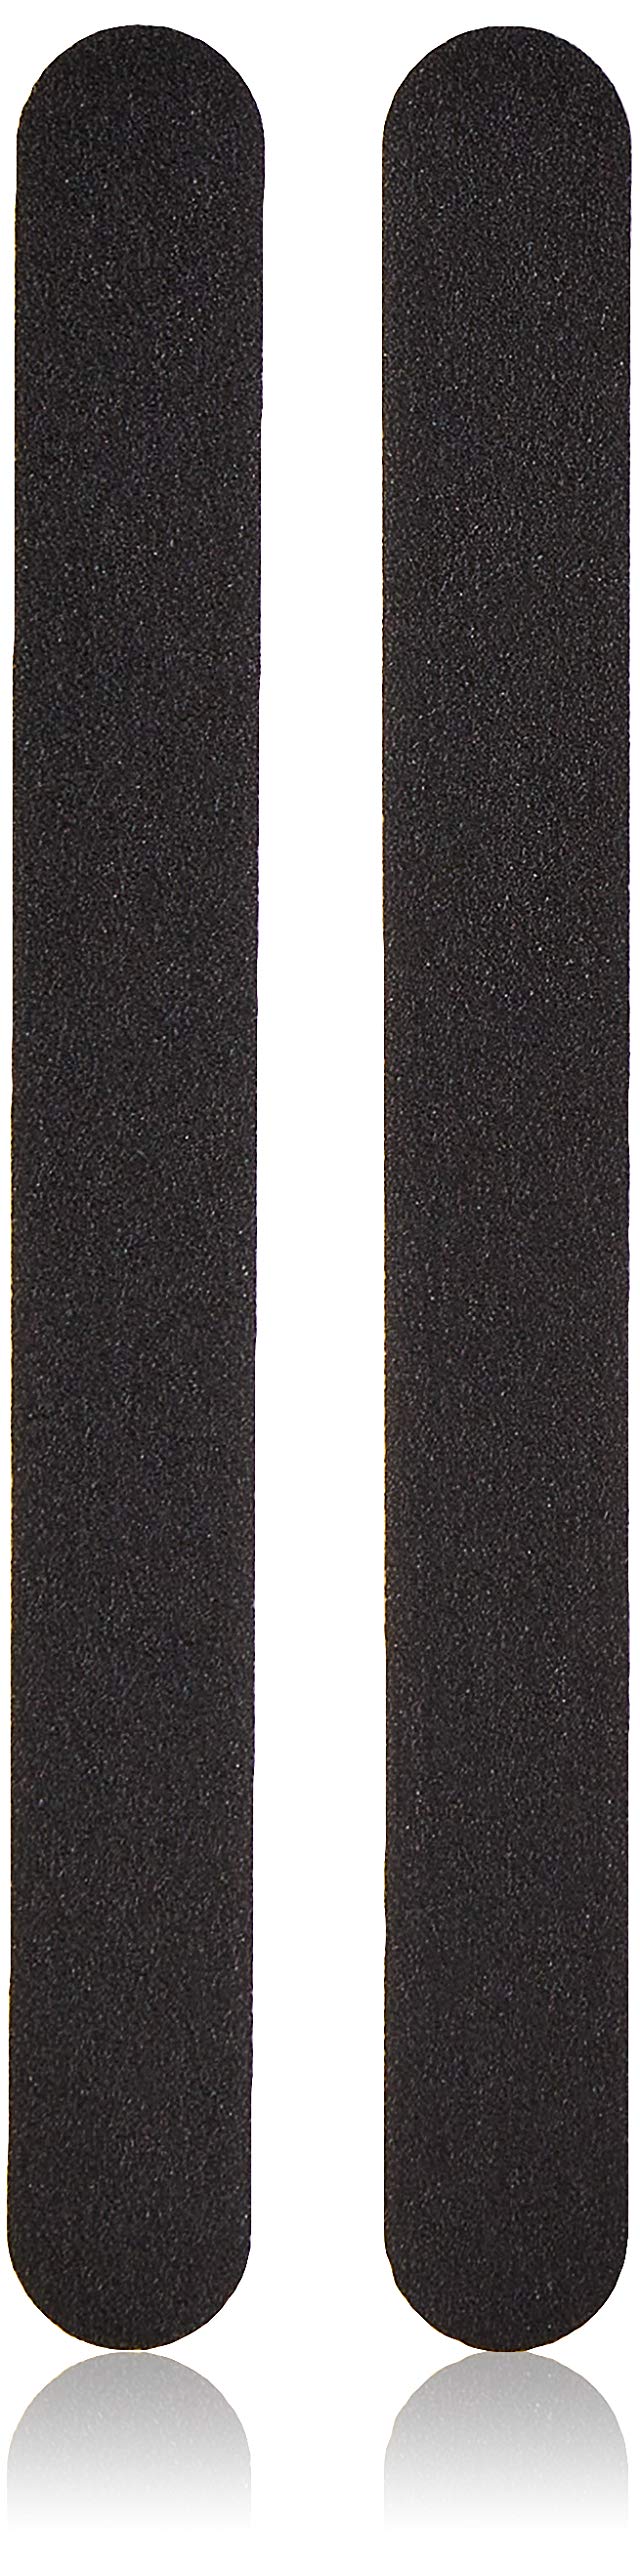 Manicare Professional Nail Files, 2-Piece 2 Count (Pack of 1), Black